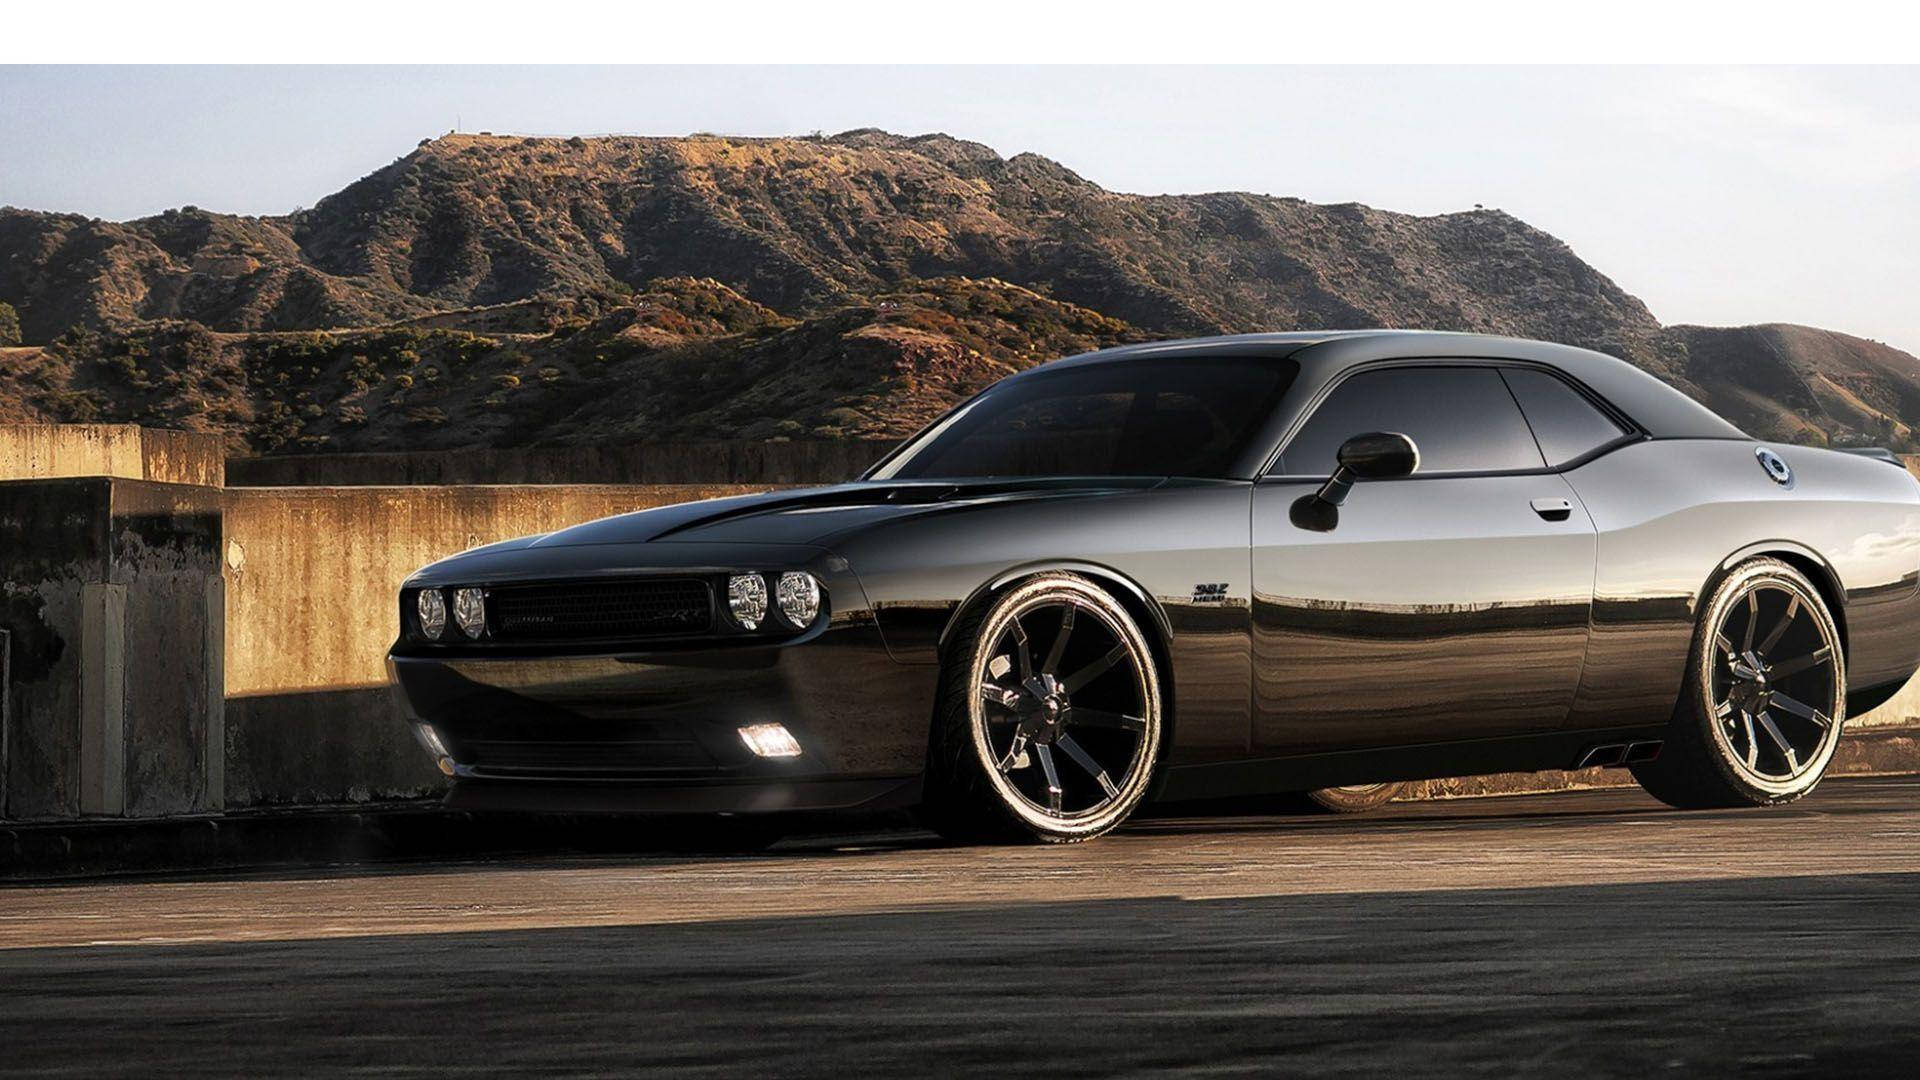 Caption: Roaring Power - Dodge Challenger on the Road Wallpaper